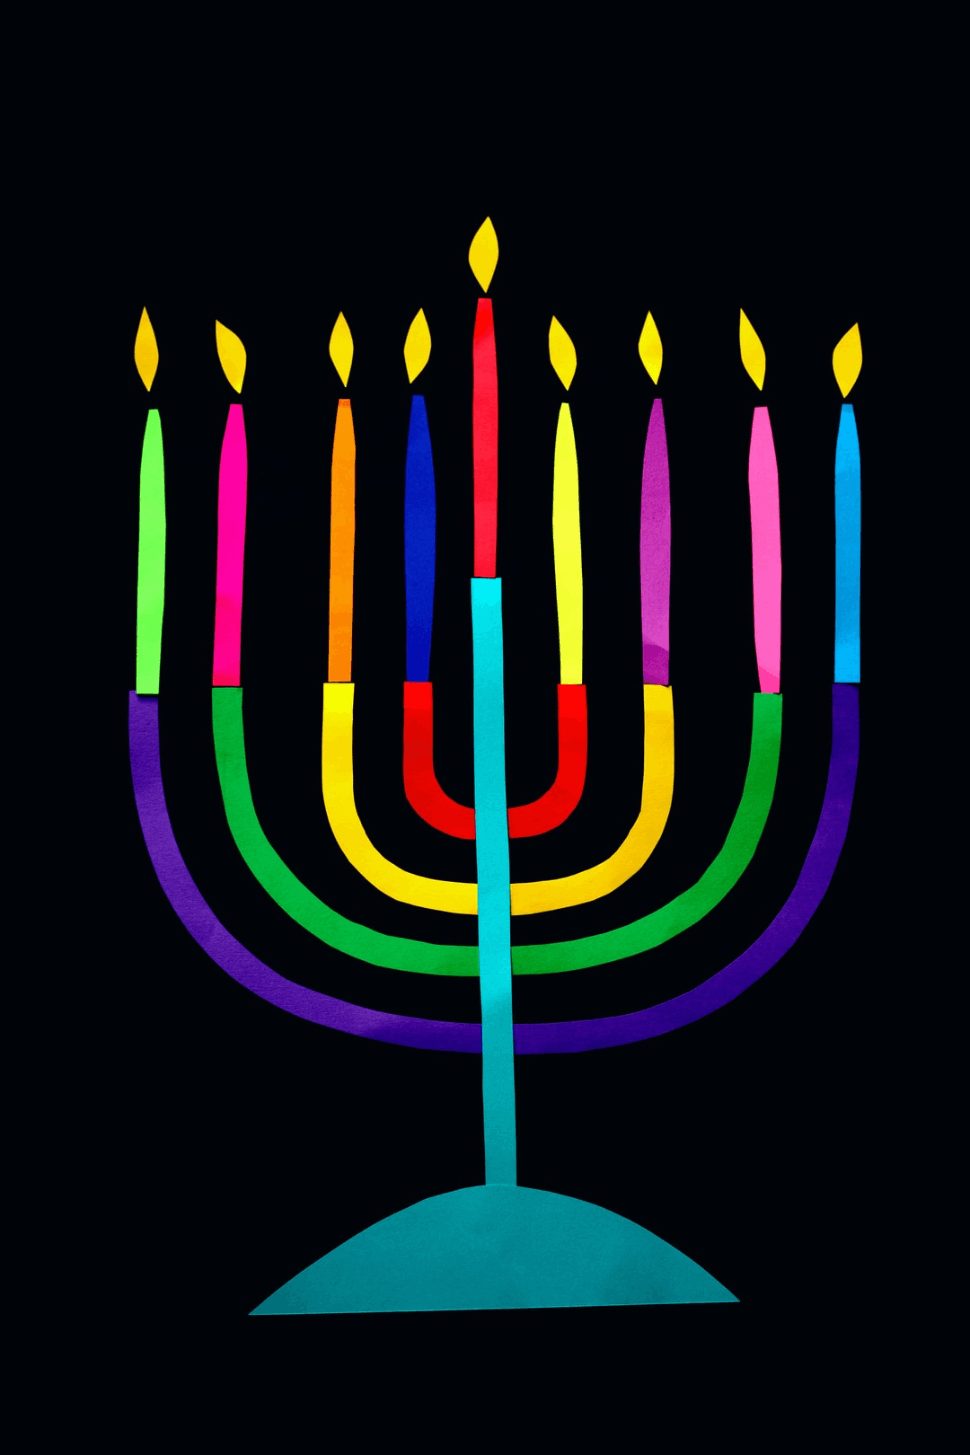 There are more than 18 possible ways to spell Hanukkah. 